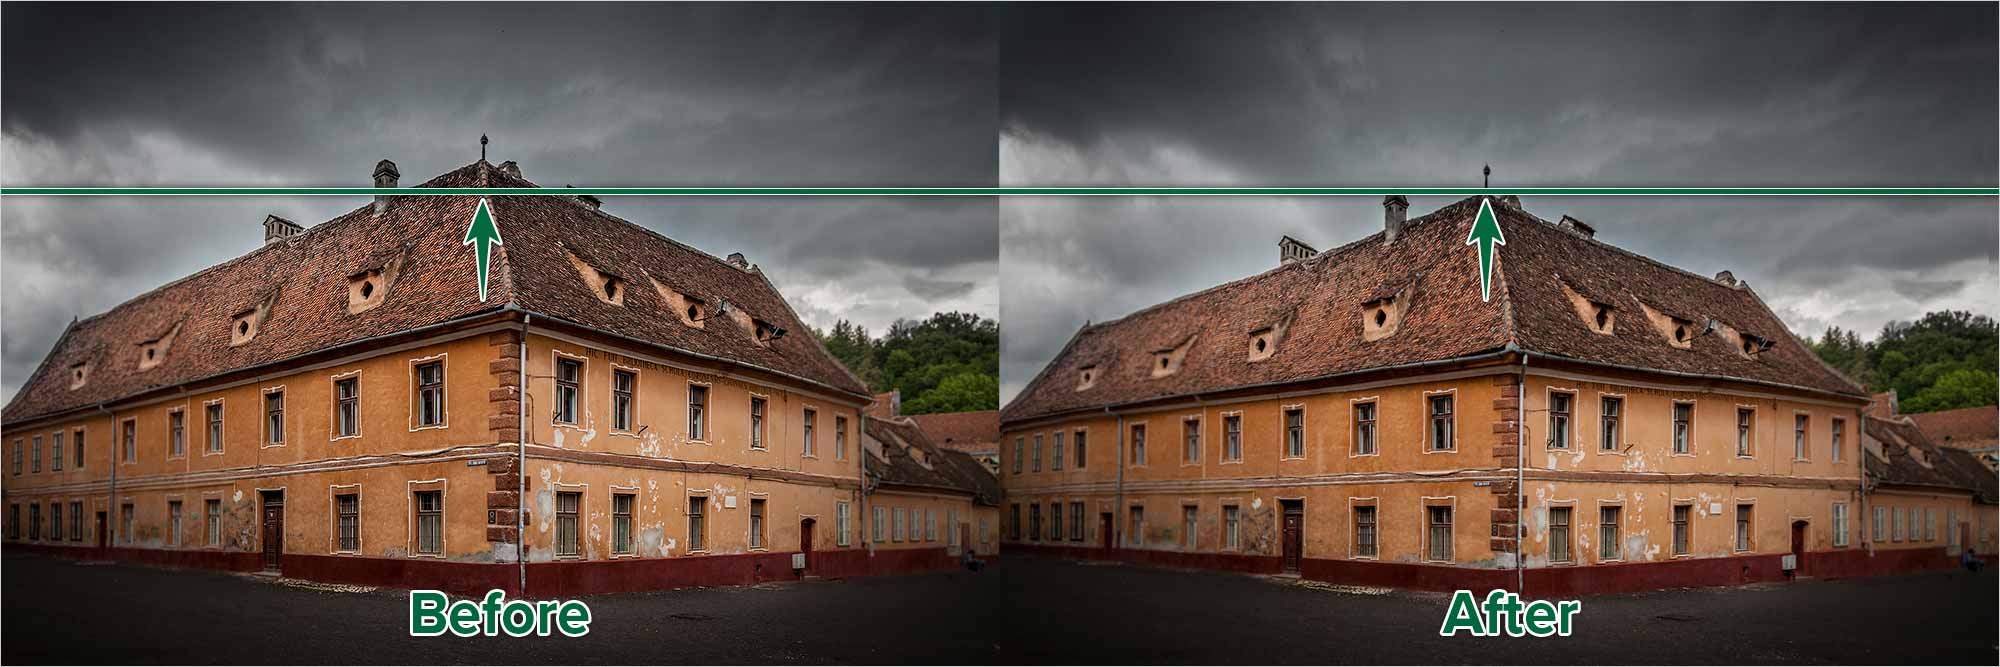 photoshop-transforms-perspective-exercise